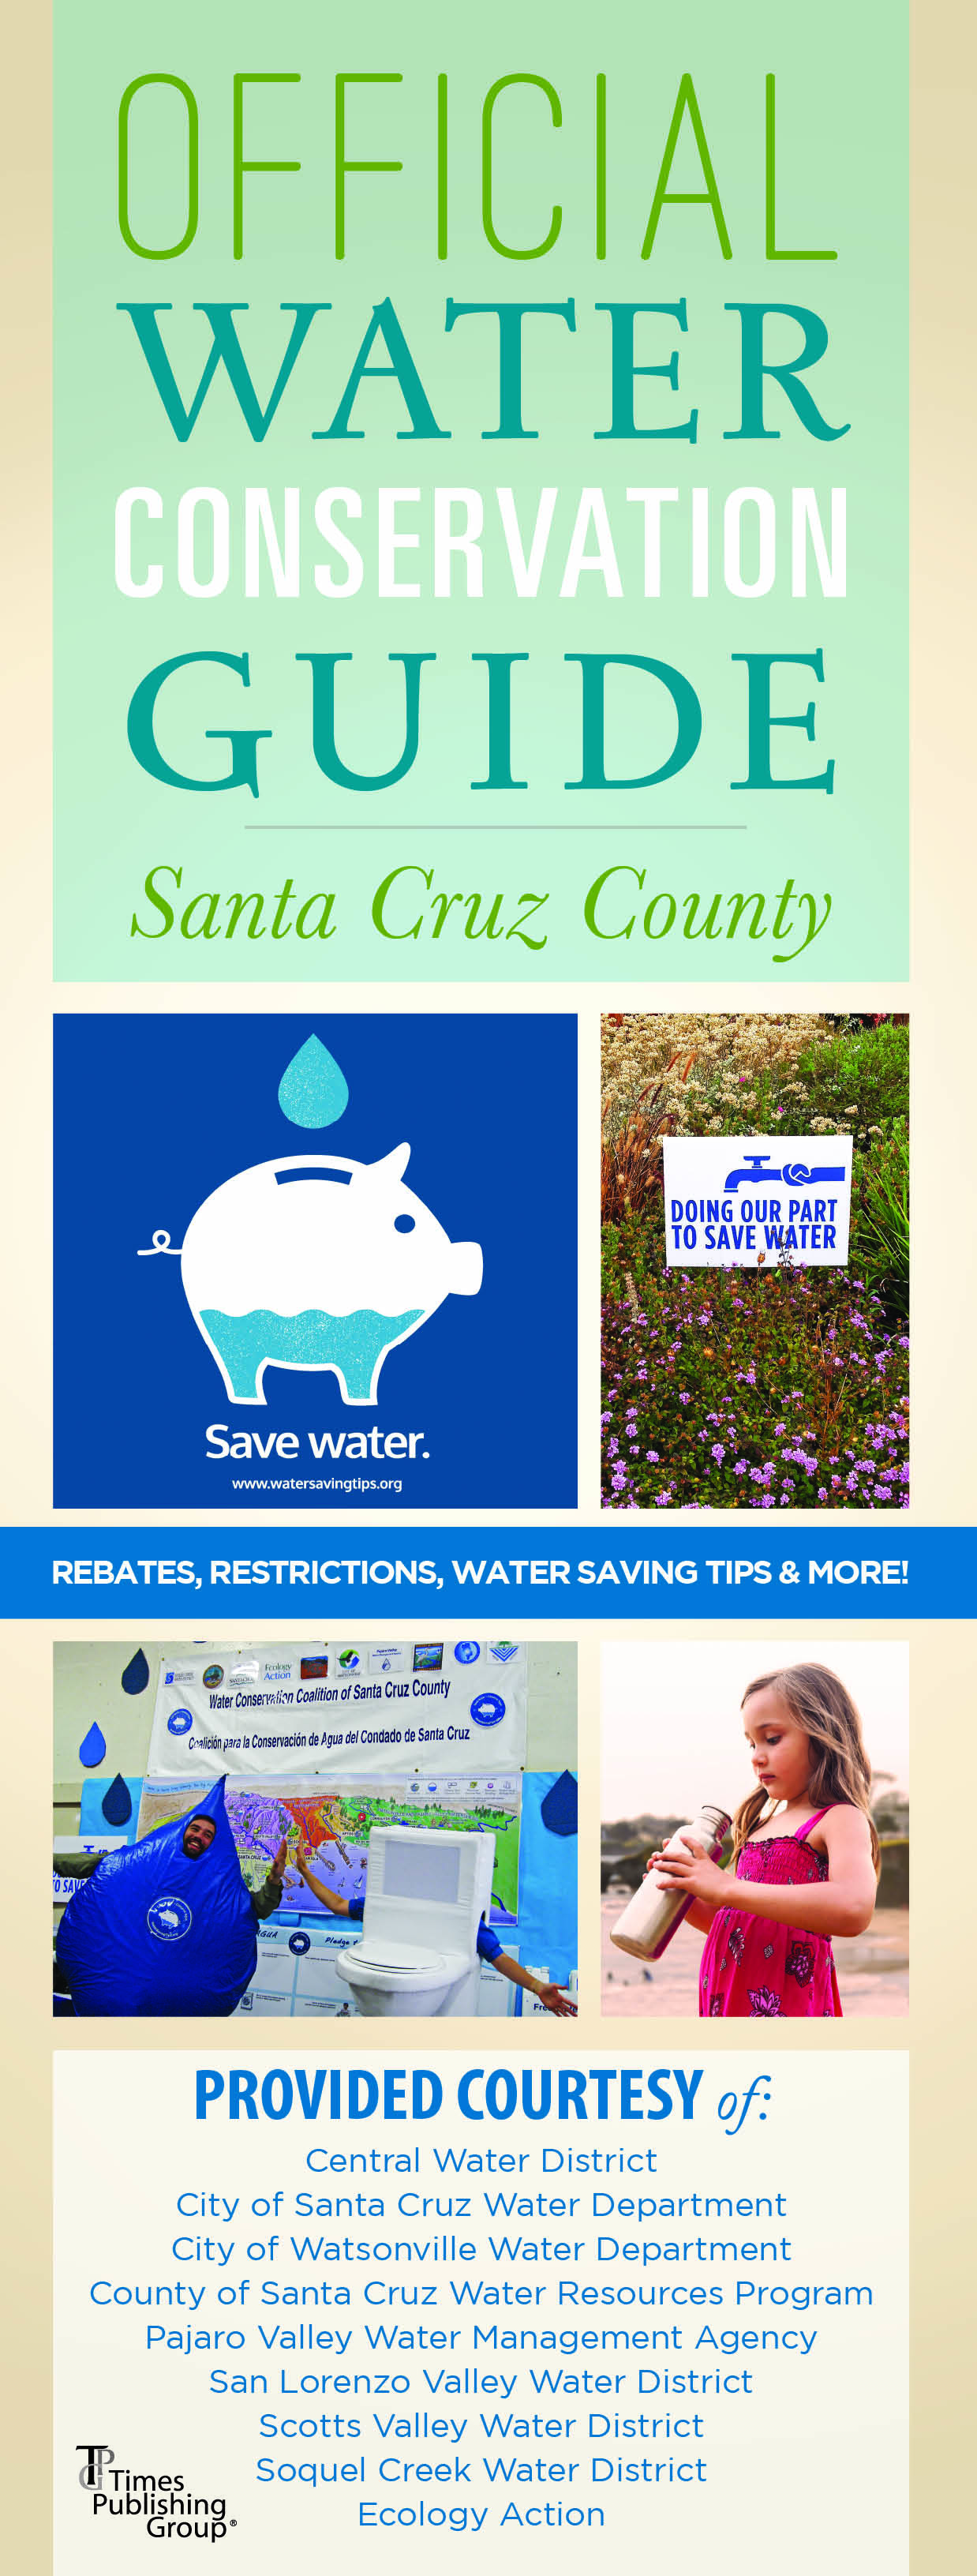 Water Conservation Guide Water Conservation Coalition Of Santa Cruz County 1627